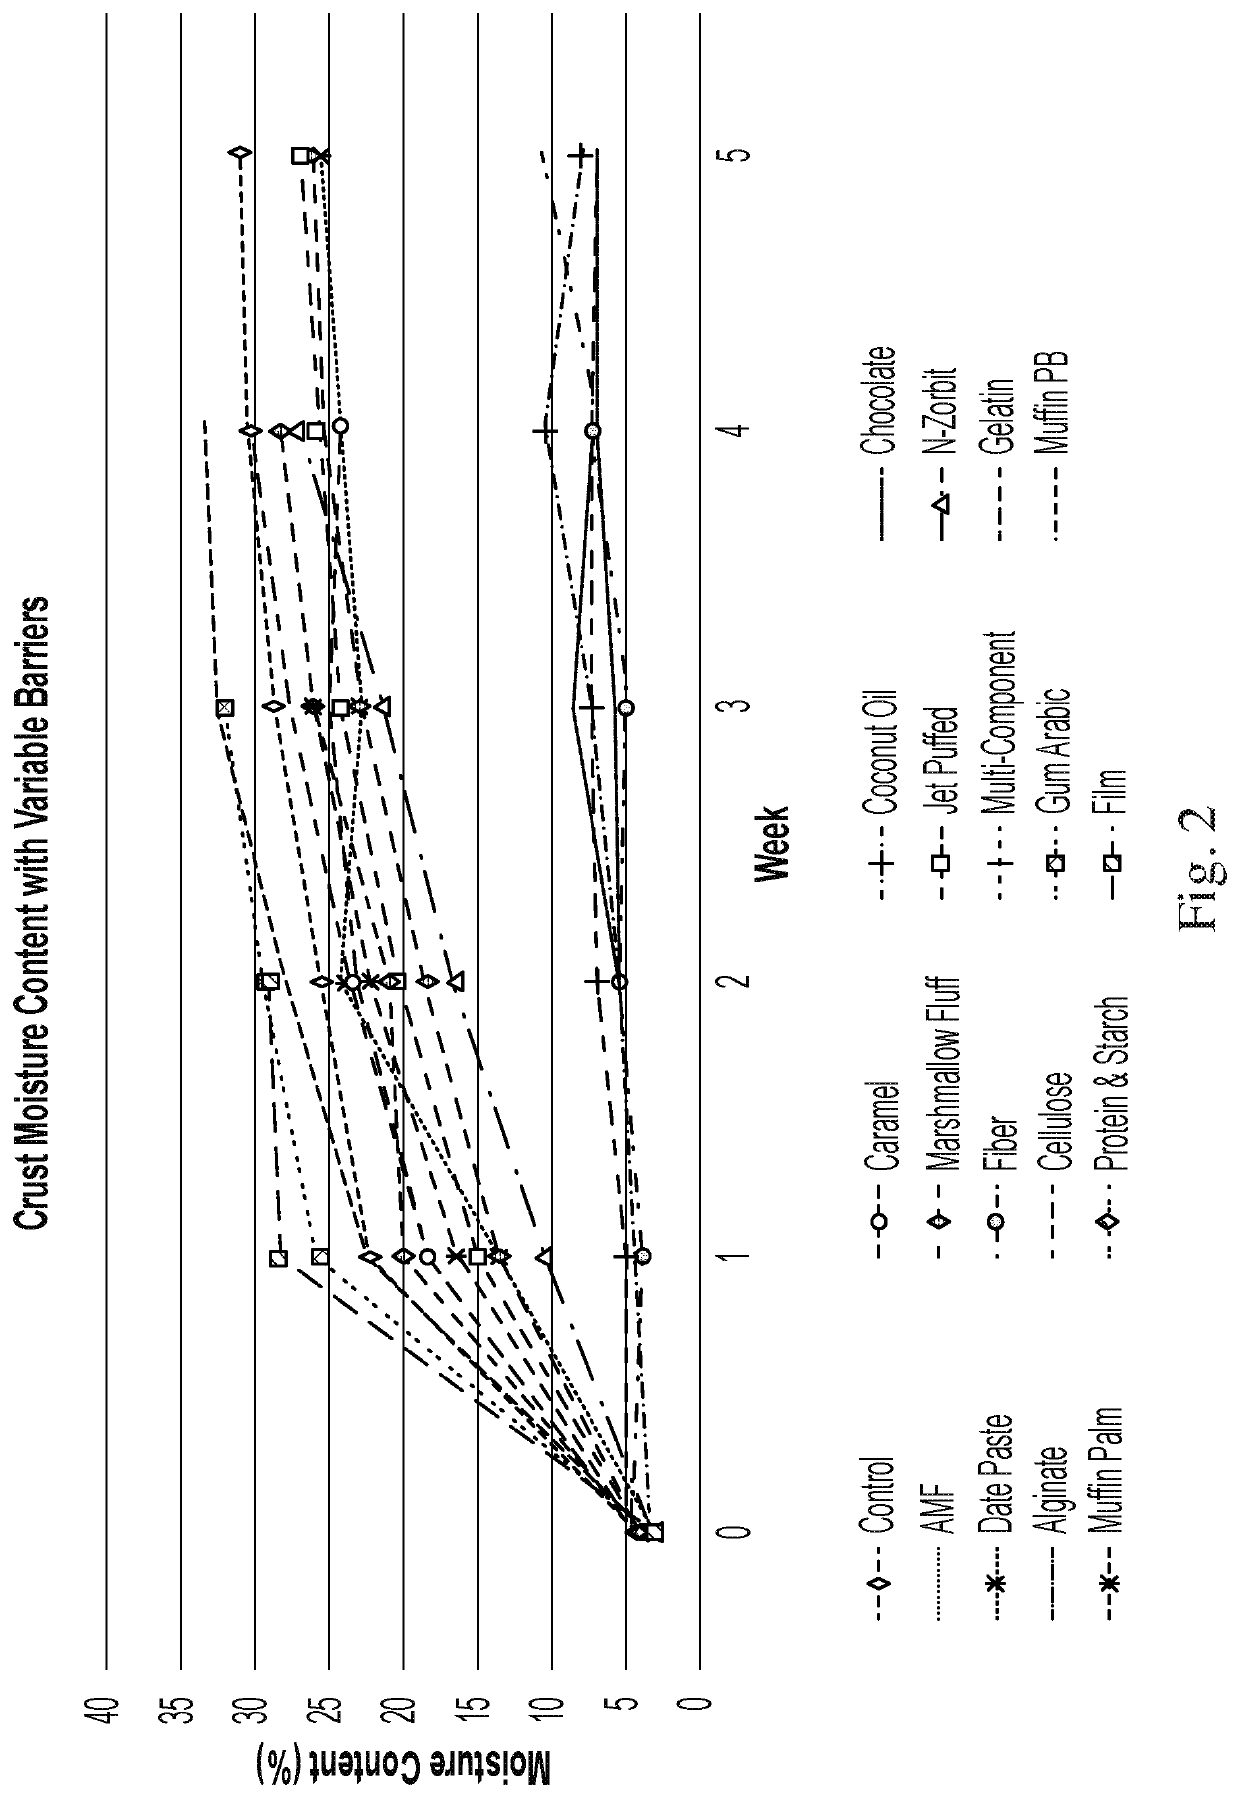 Multilayer edible products comprising a barrier layer